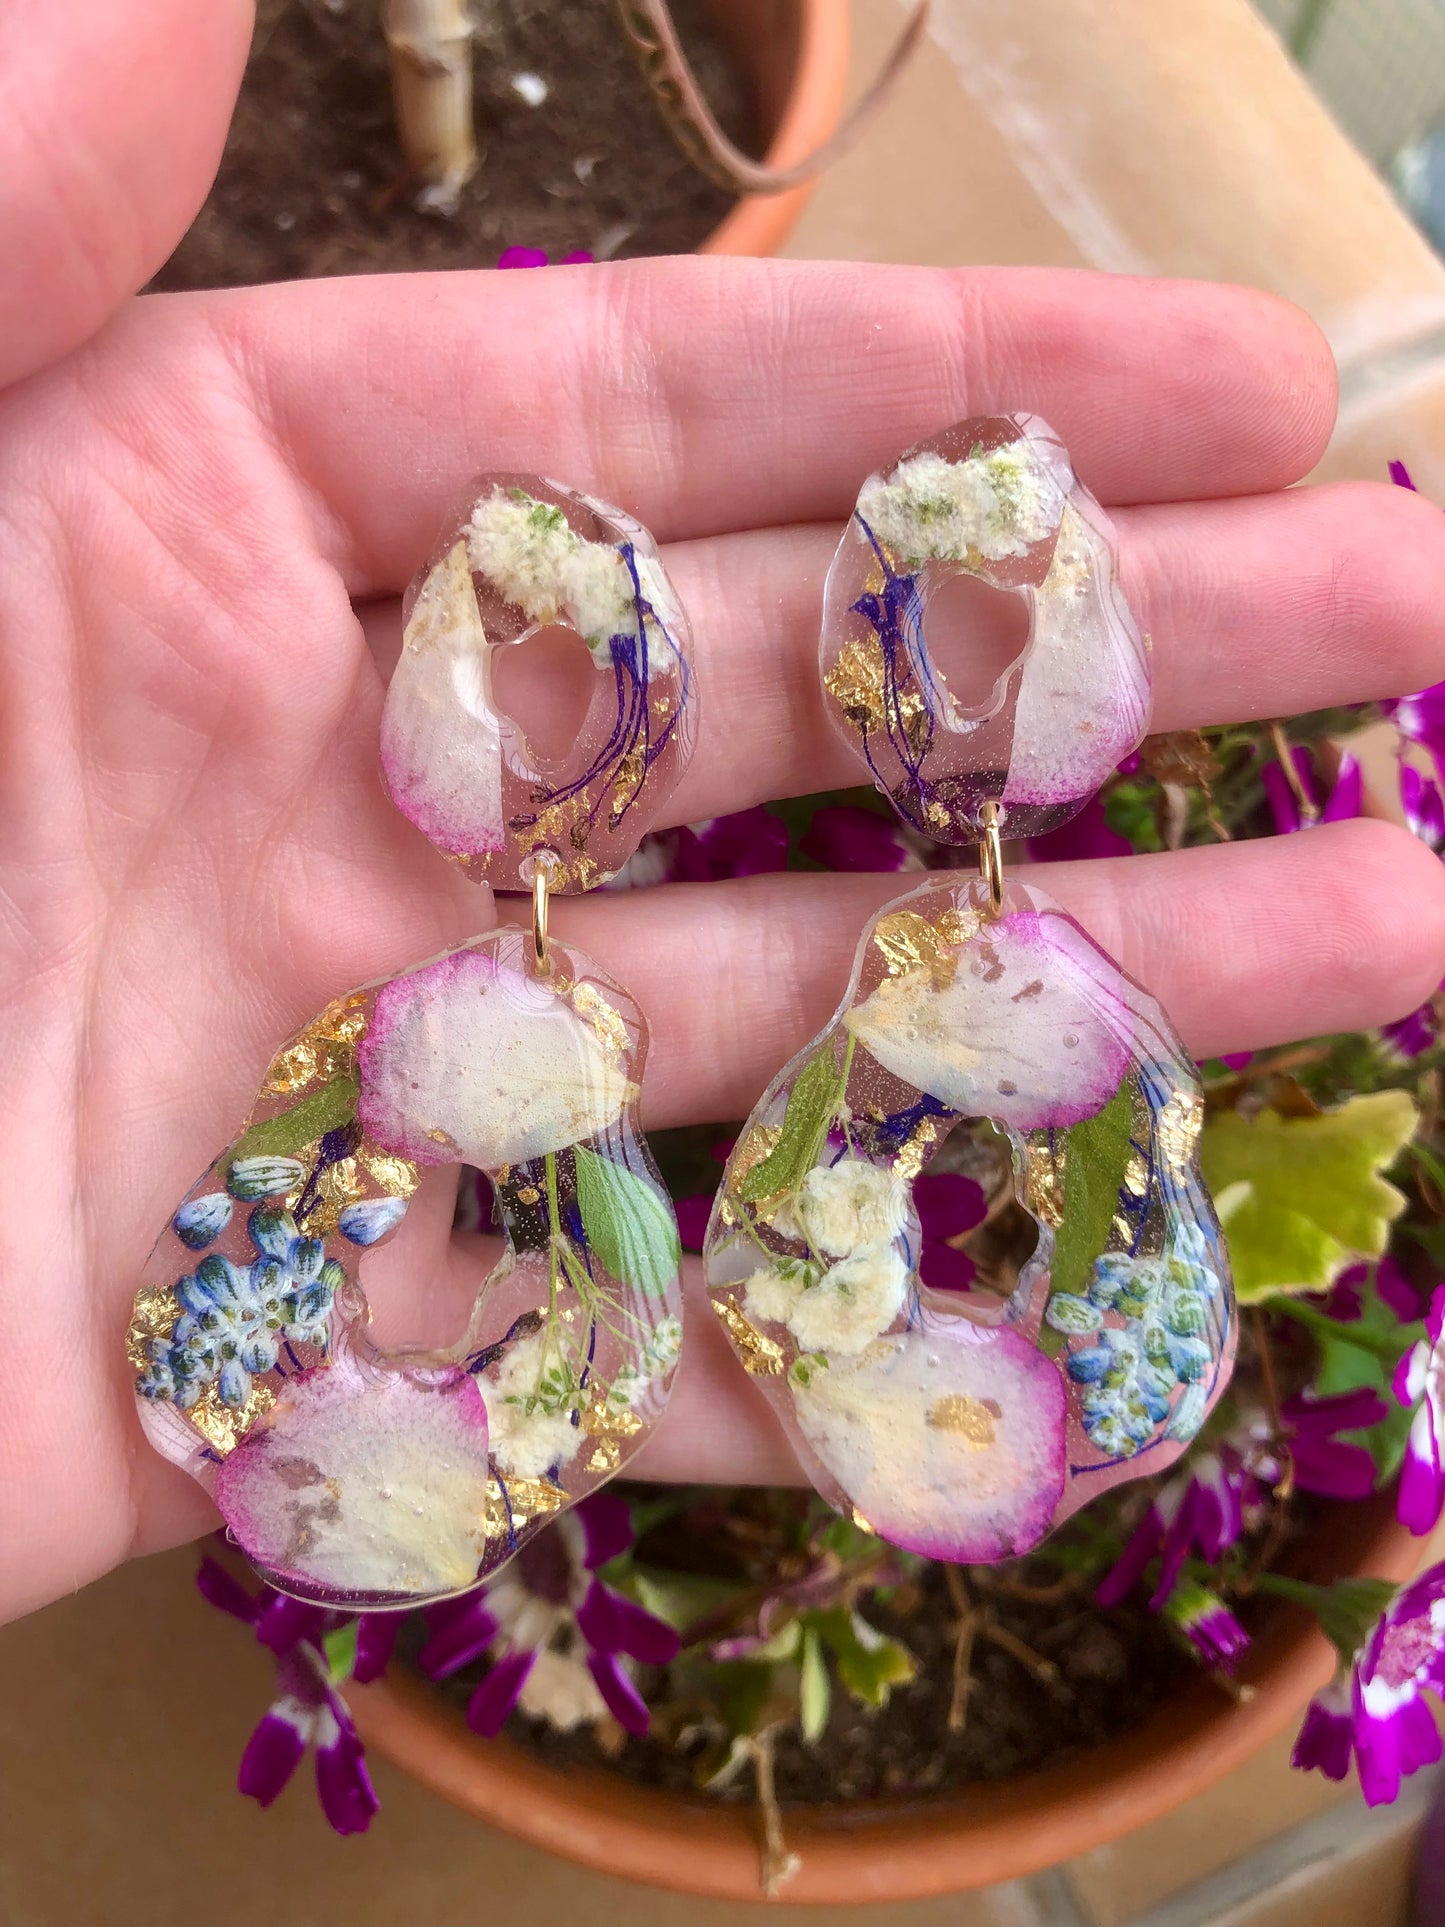 Earrings made with real flowers